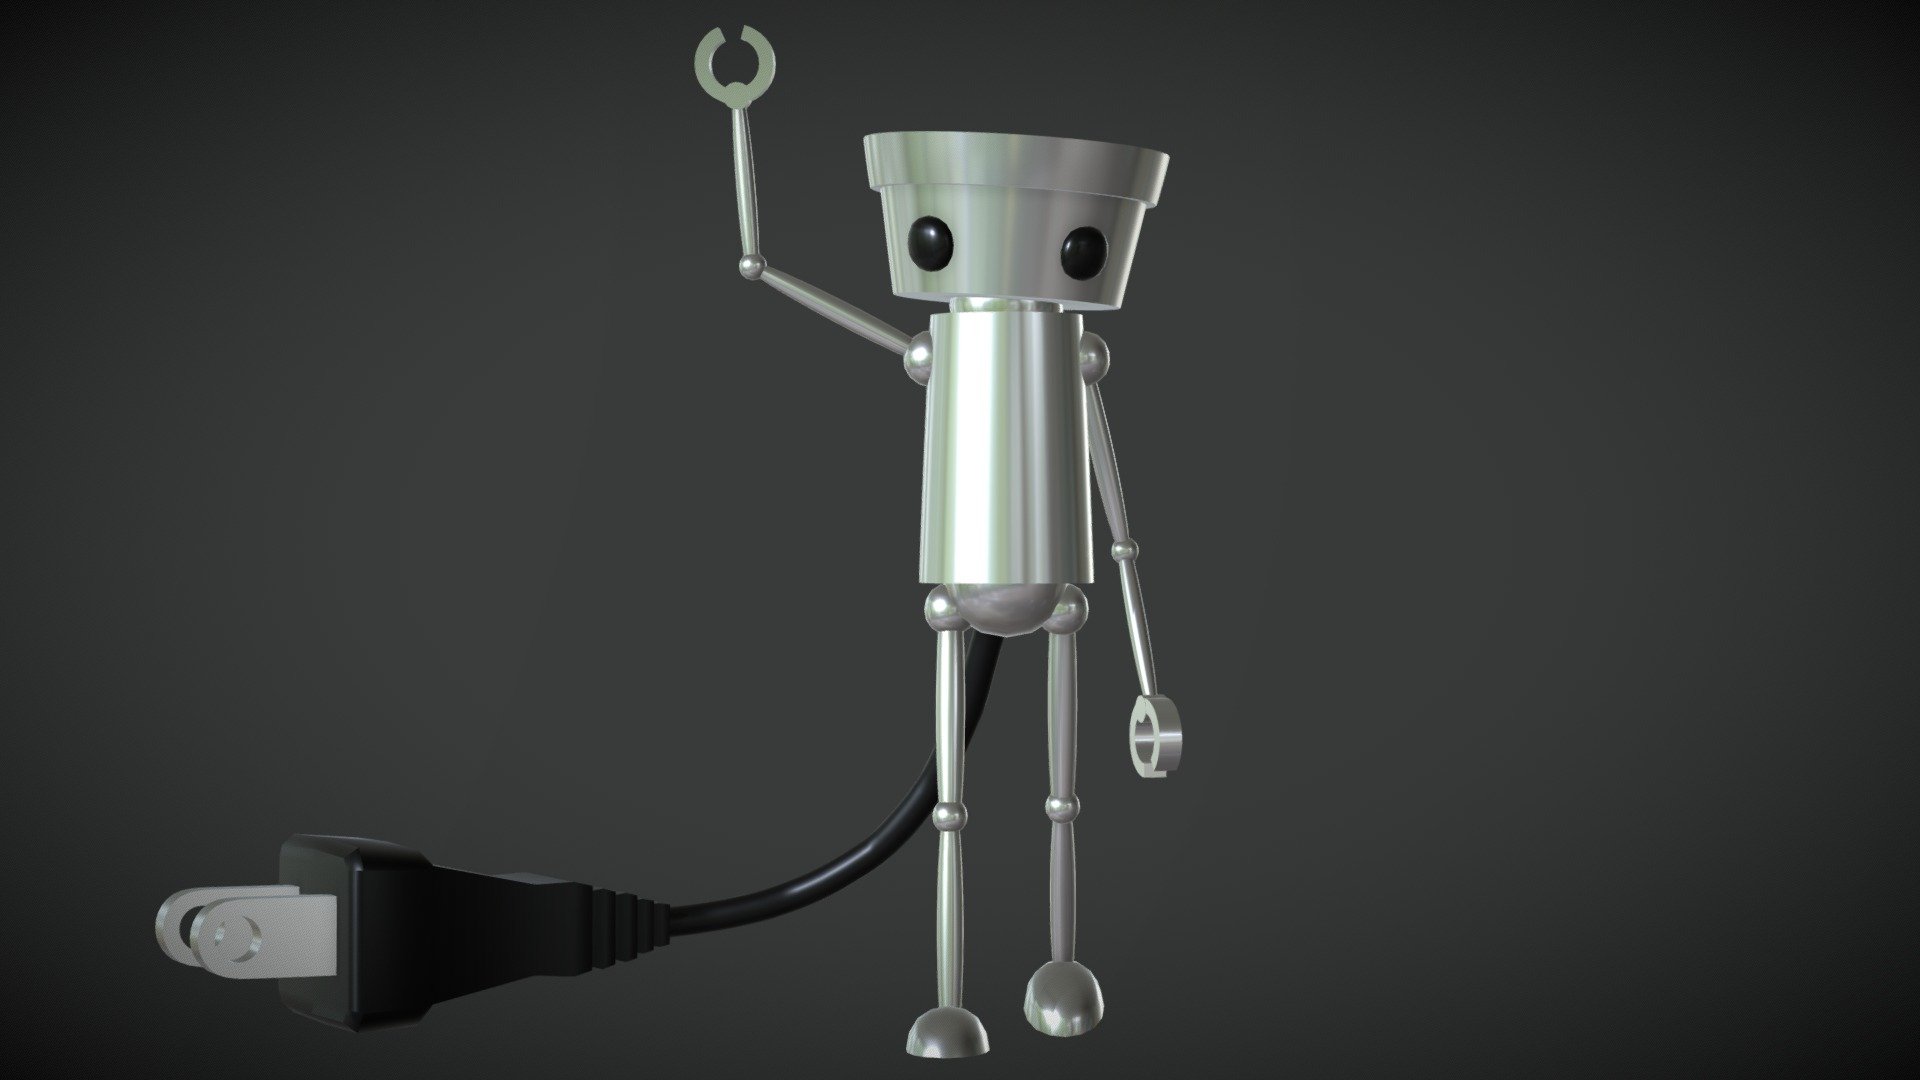 Inspired from the gamecube version of Chibi-Robo 3d model